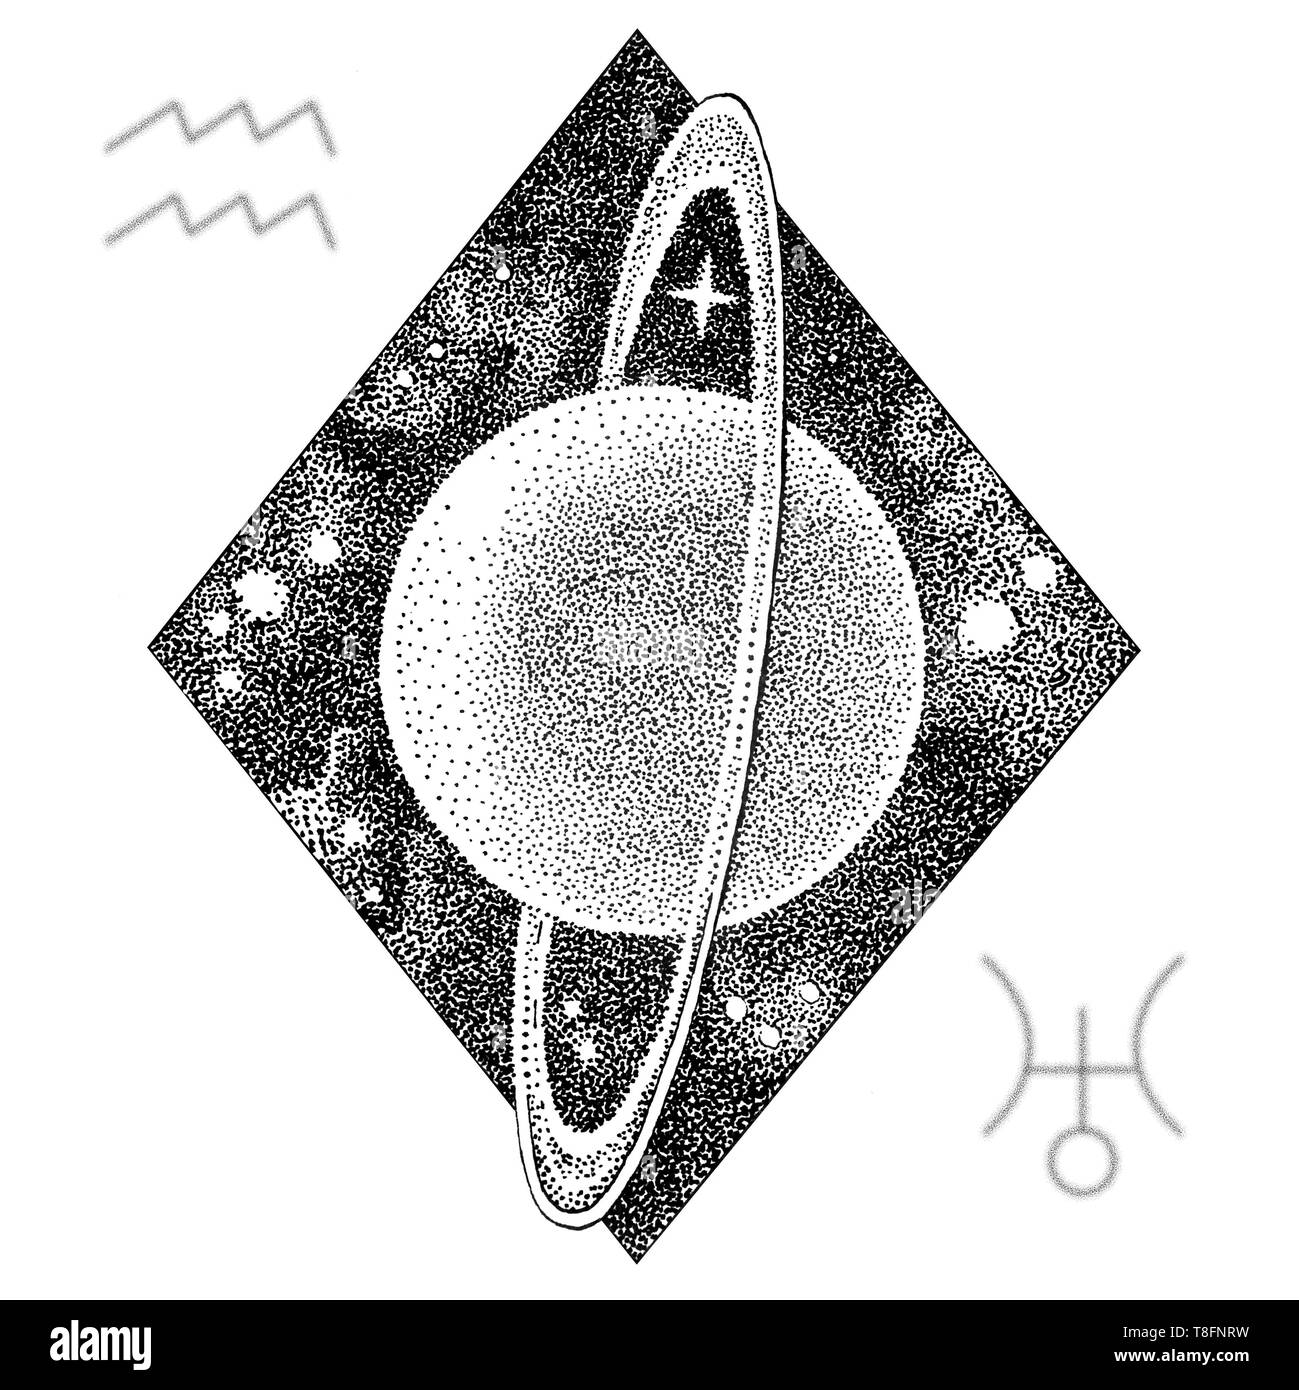 Uranus planet. Hand drawn illustration in dotwork style with Uranus's astrological symbol and a symbol of Aquarius zodiac sign. Space concept, astrolo Stock Photo